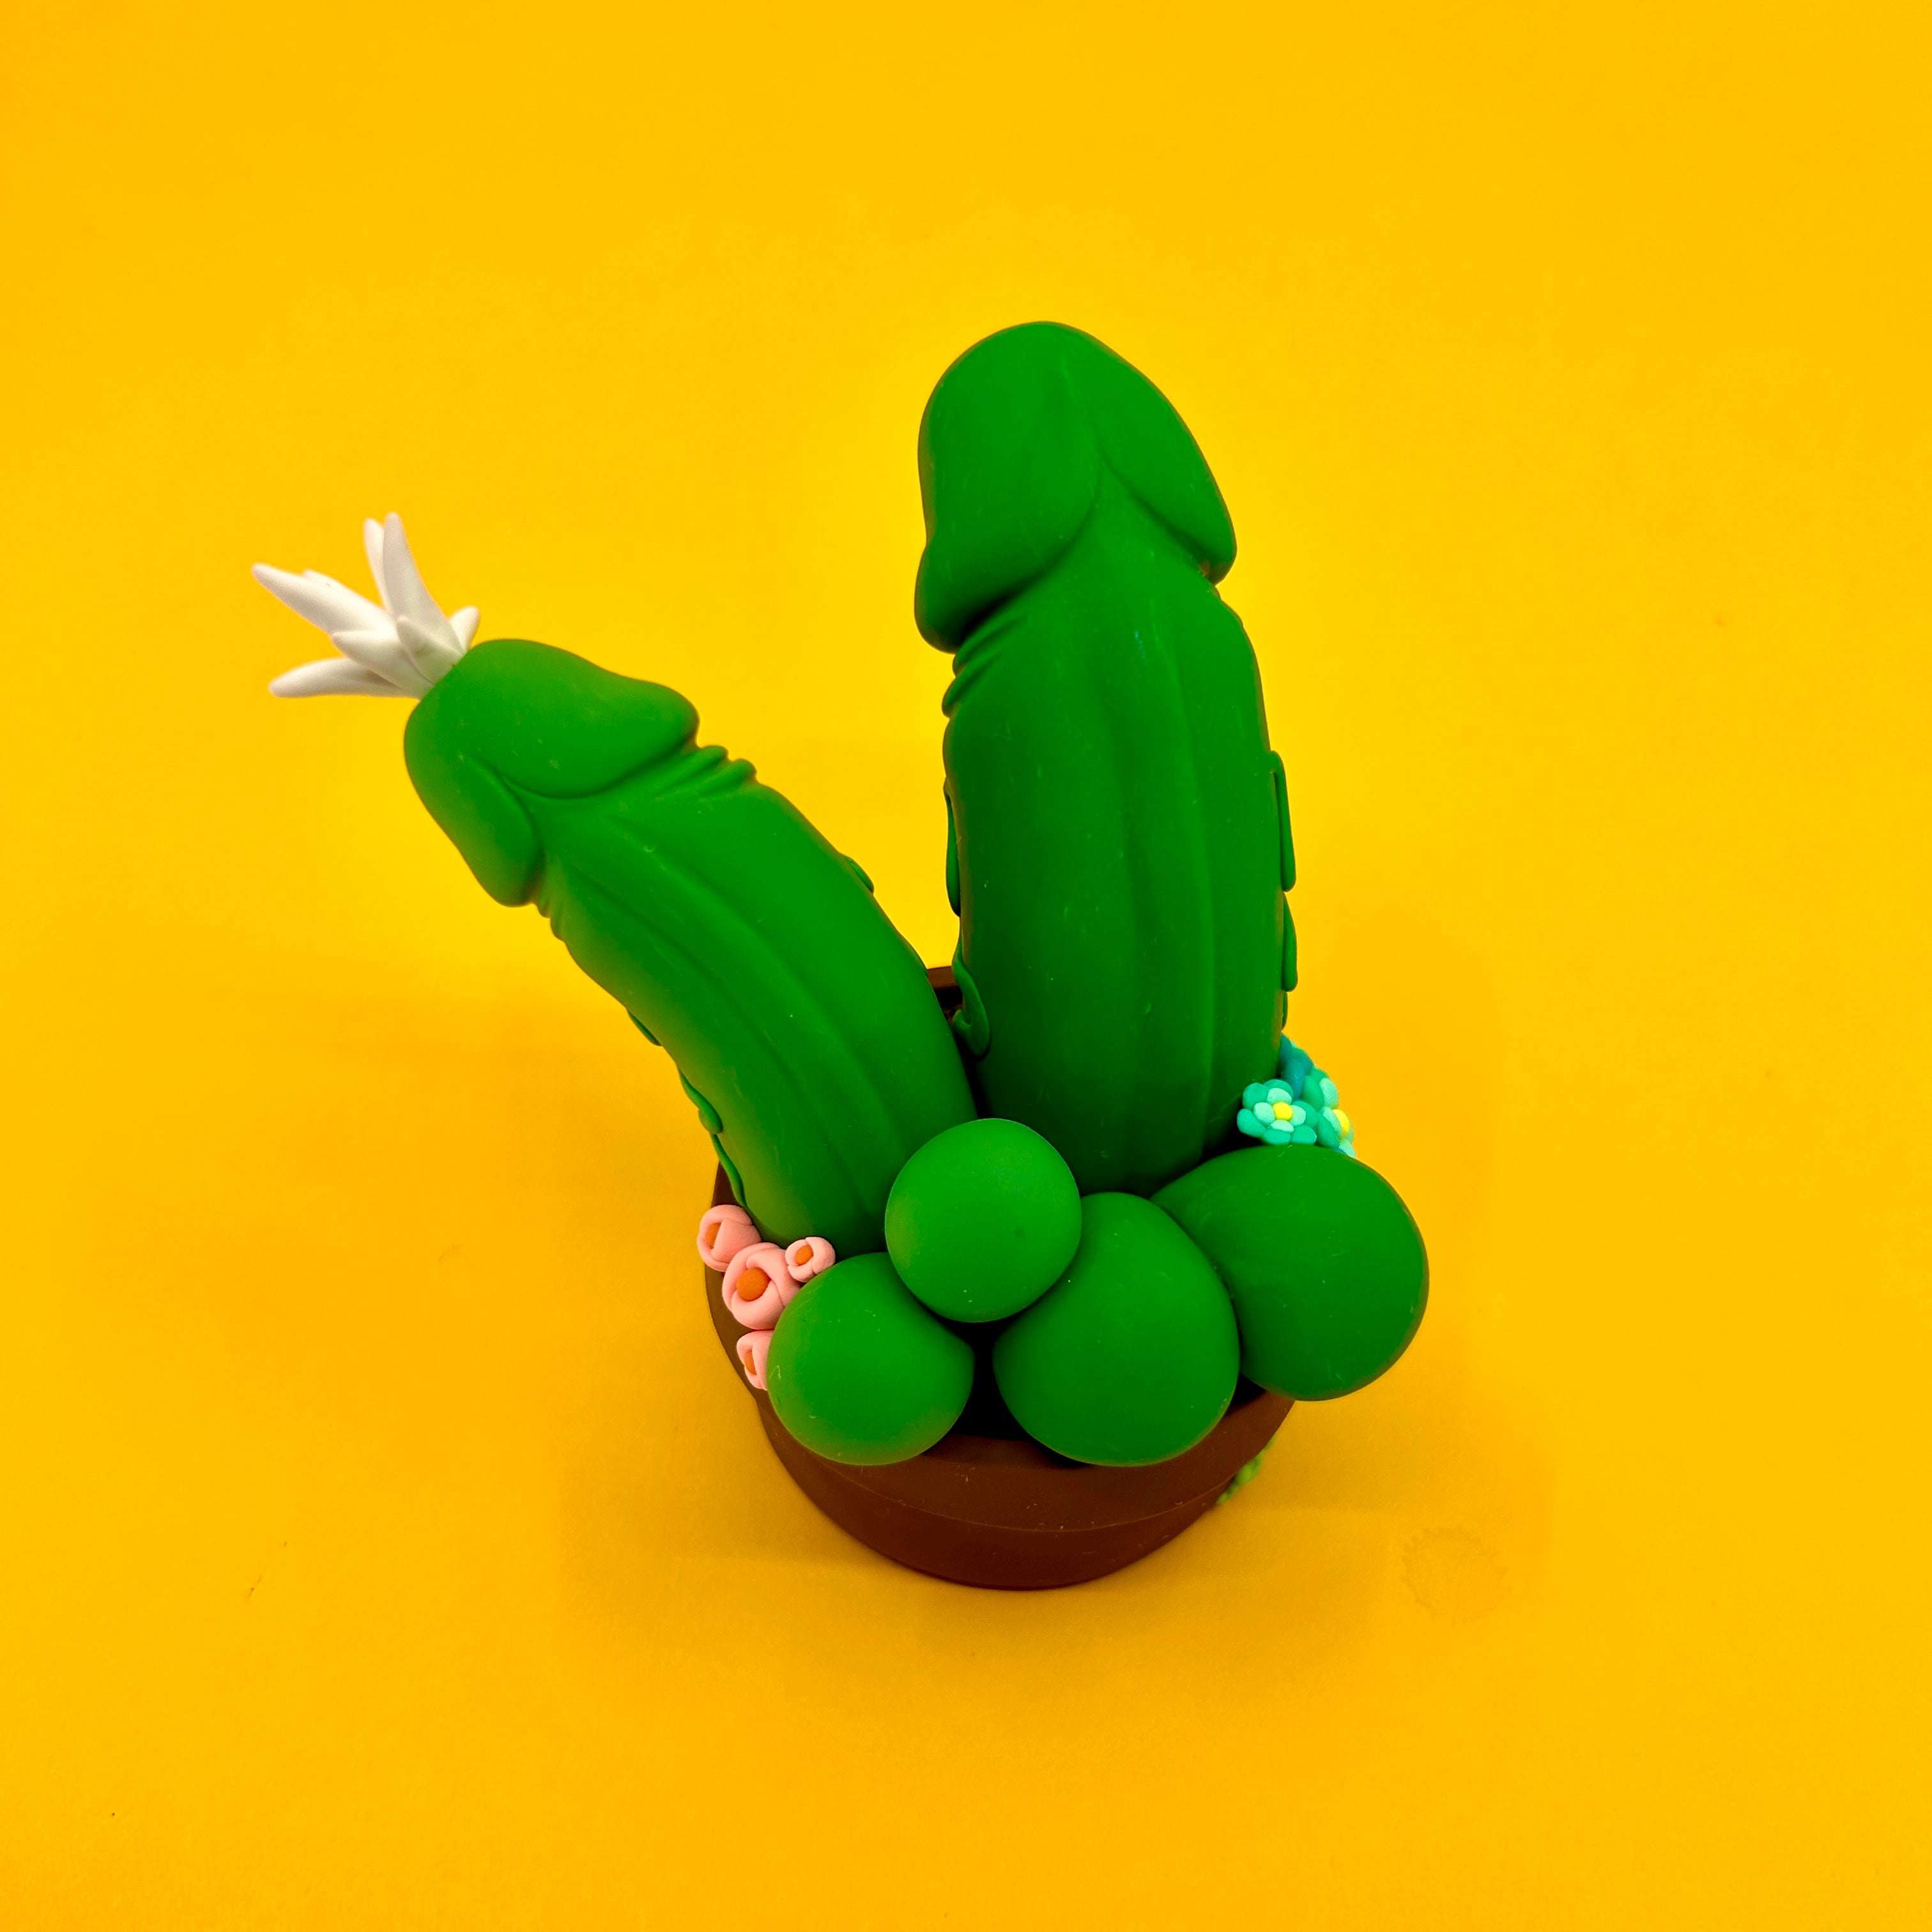 Polymer clay cactus in pot with flower and toy cucumber.